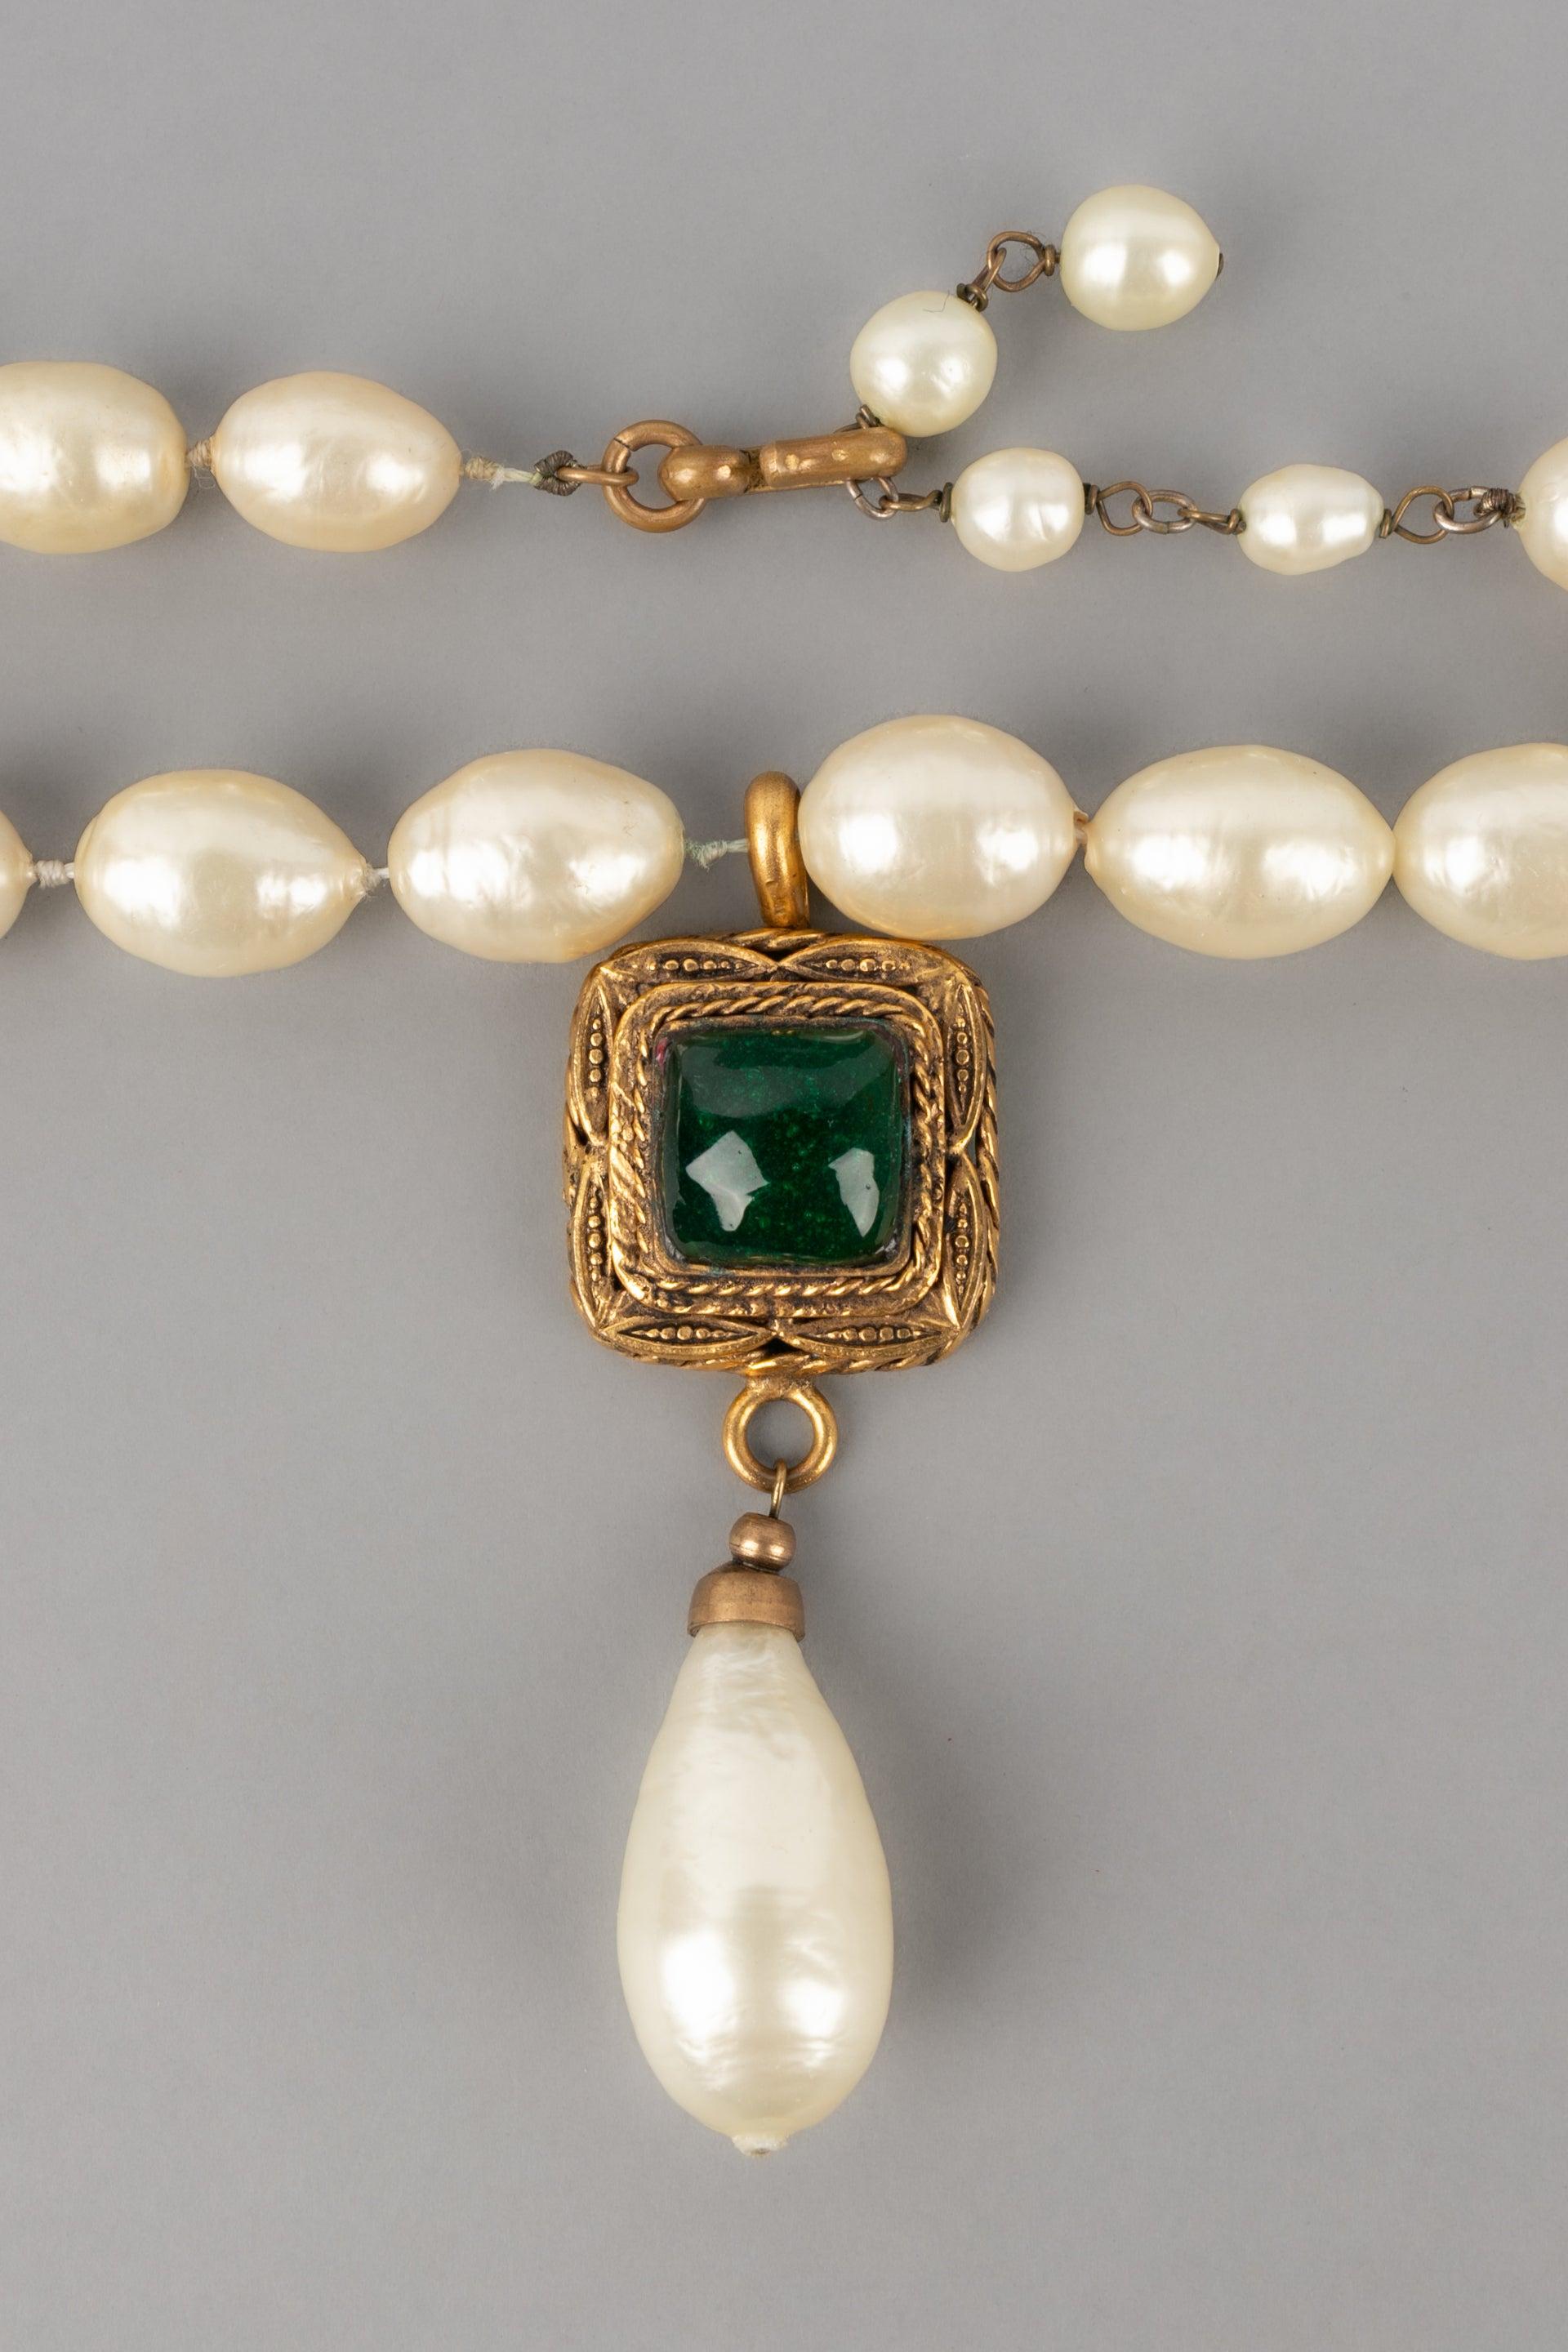 Chanel Costume Pearl Necklace with a Golden Metal Pendant, 1983 For Sale 3